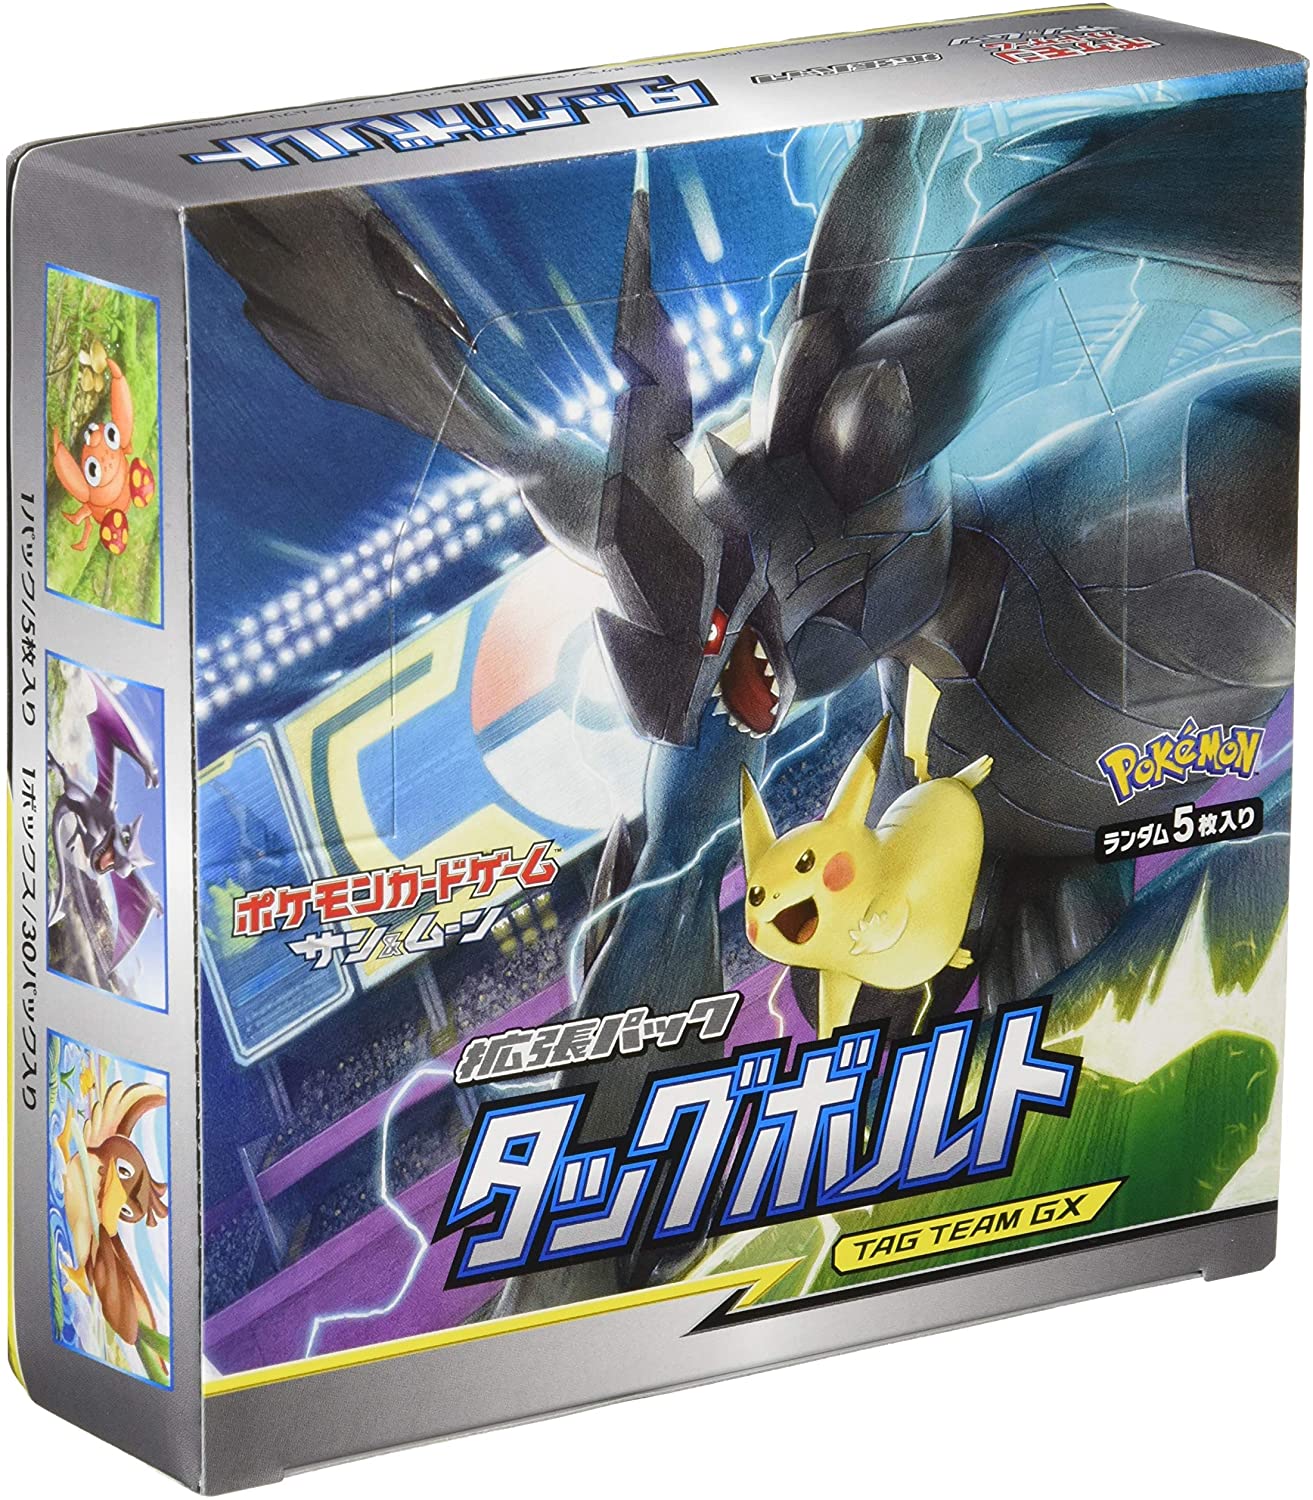 Pokemon card game Sun & Moon expansion pack "super explosion impact" BOX NEW